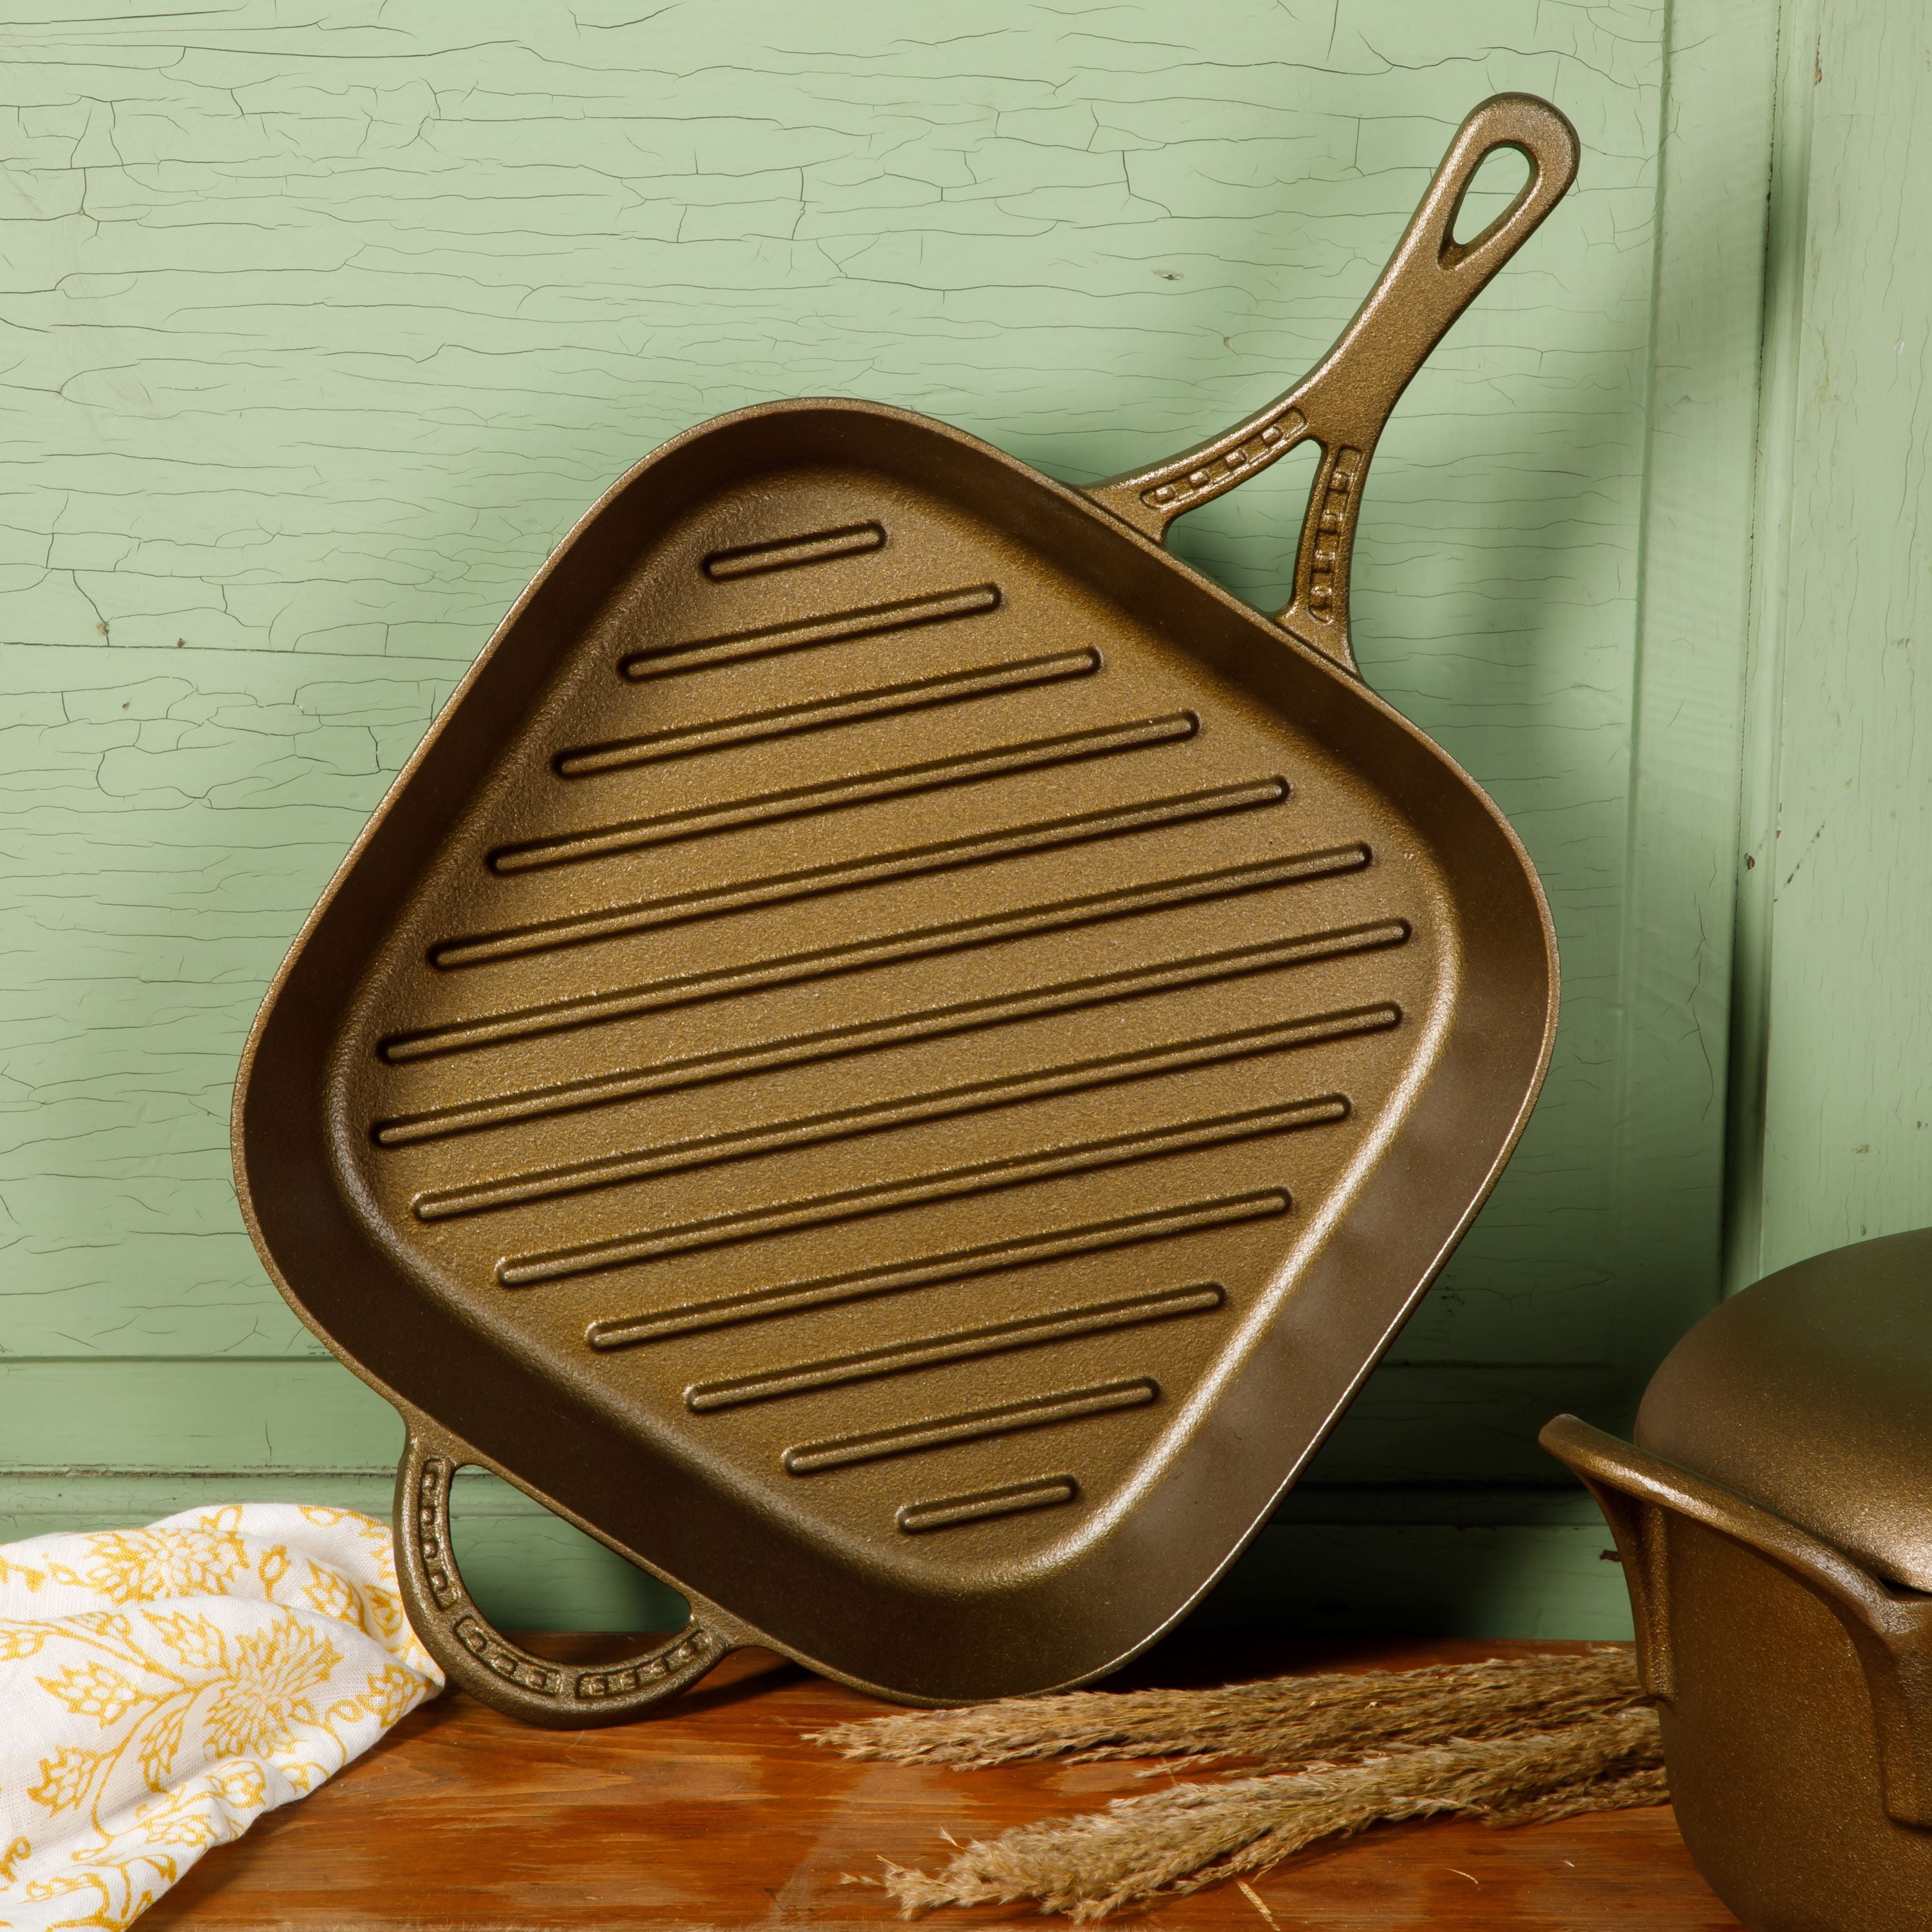 Brass grill pan placed on the gas stove 6929378 Stock Photo at